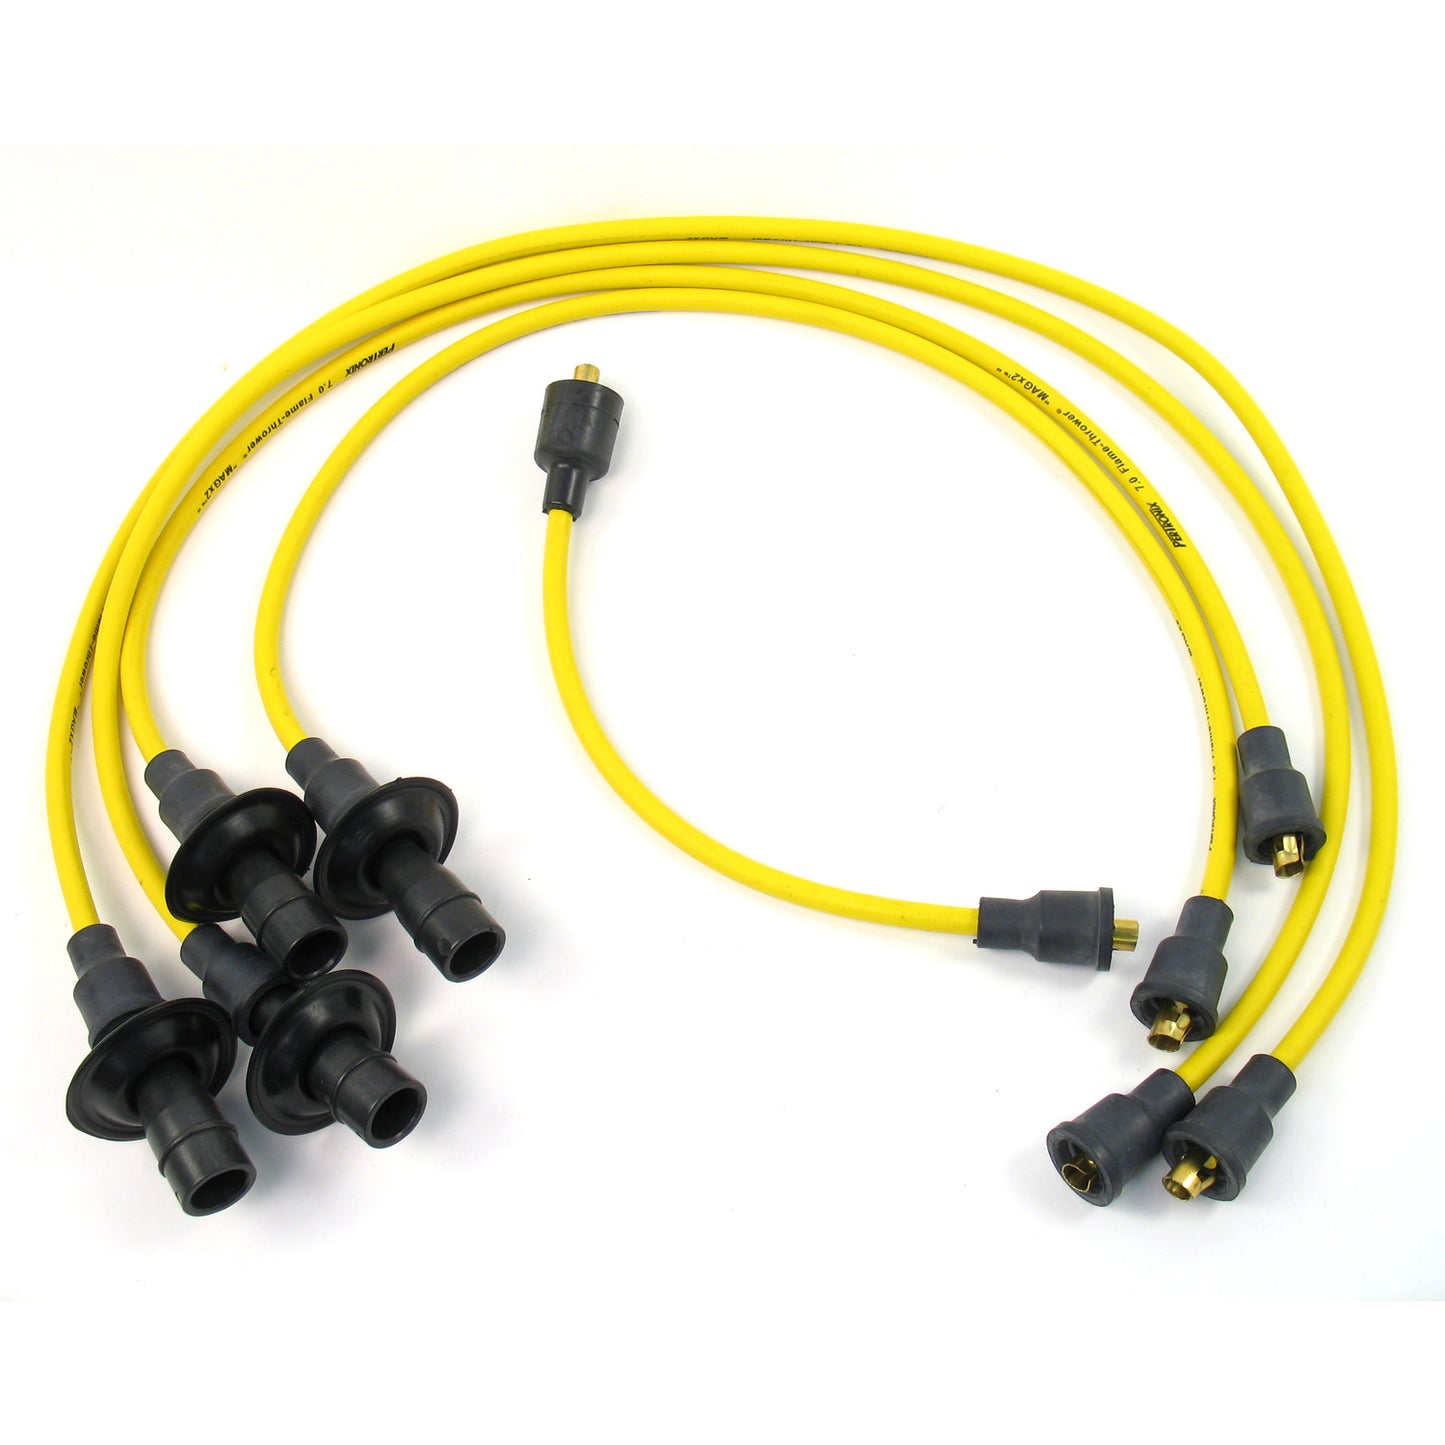 PerTronix 704501 Flame-Thrower Spark Plug Wires 4 cyl VW Custom Fit Yellow